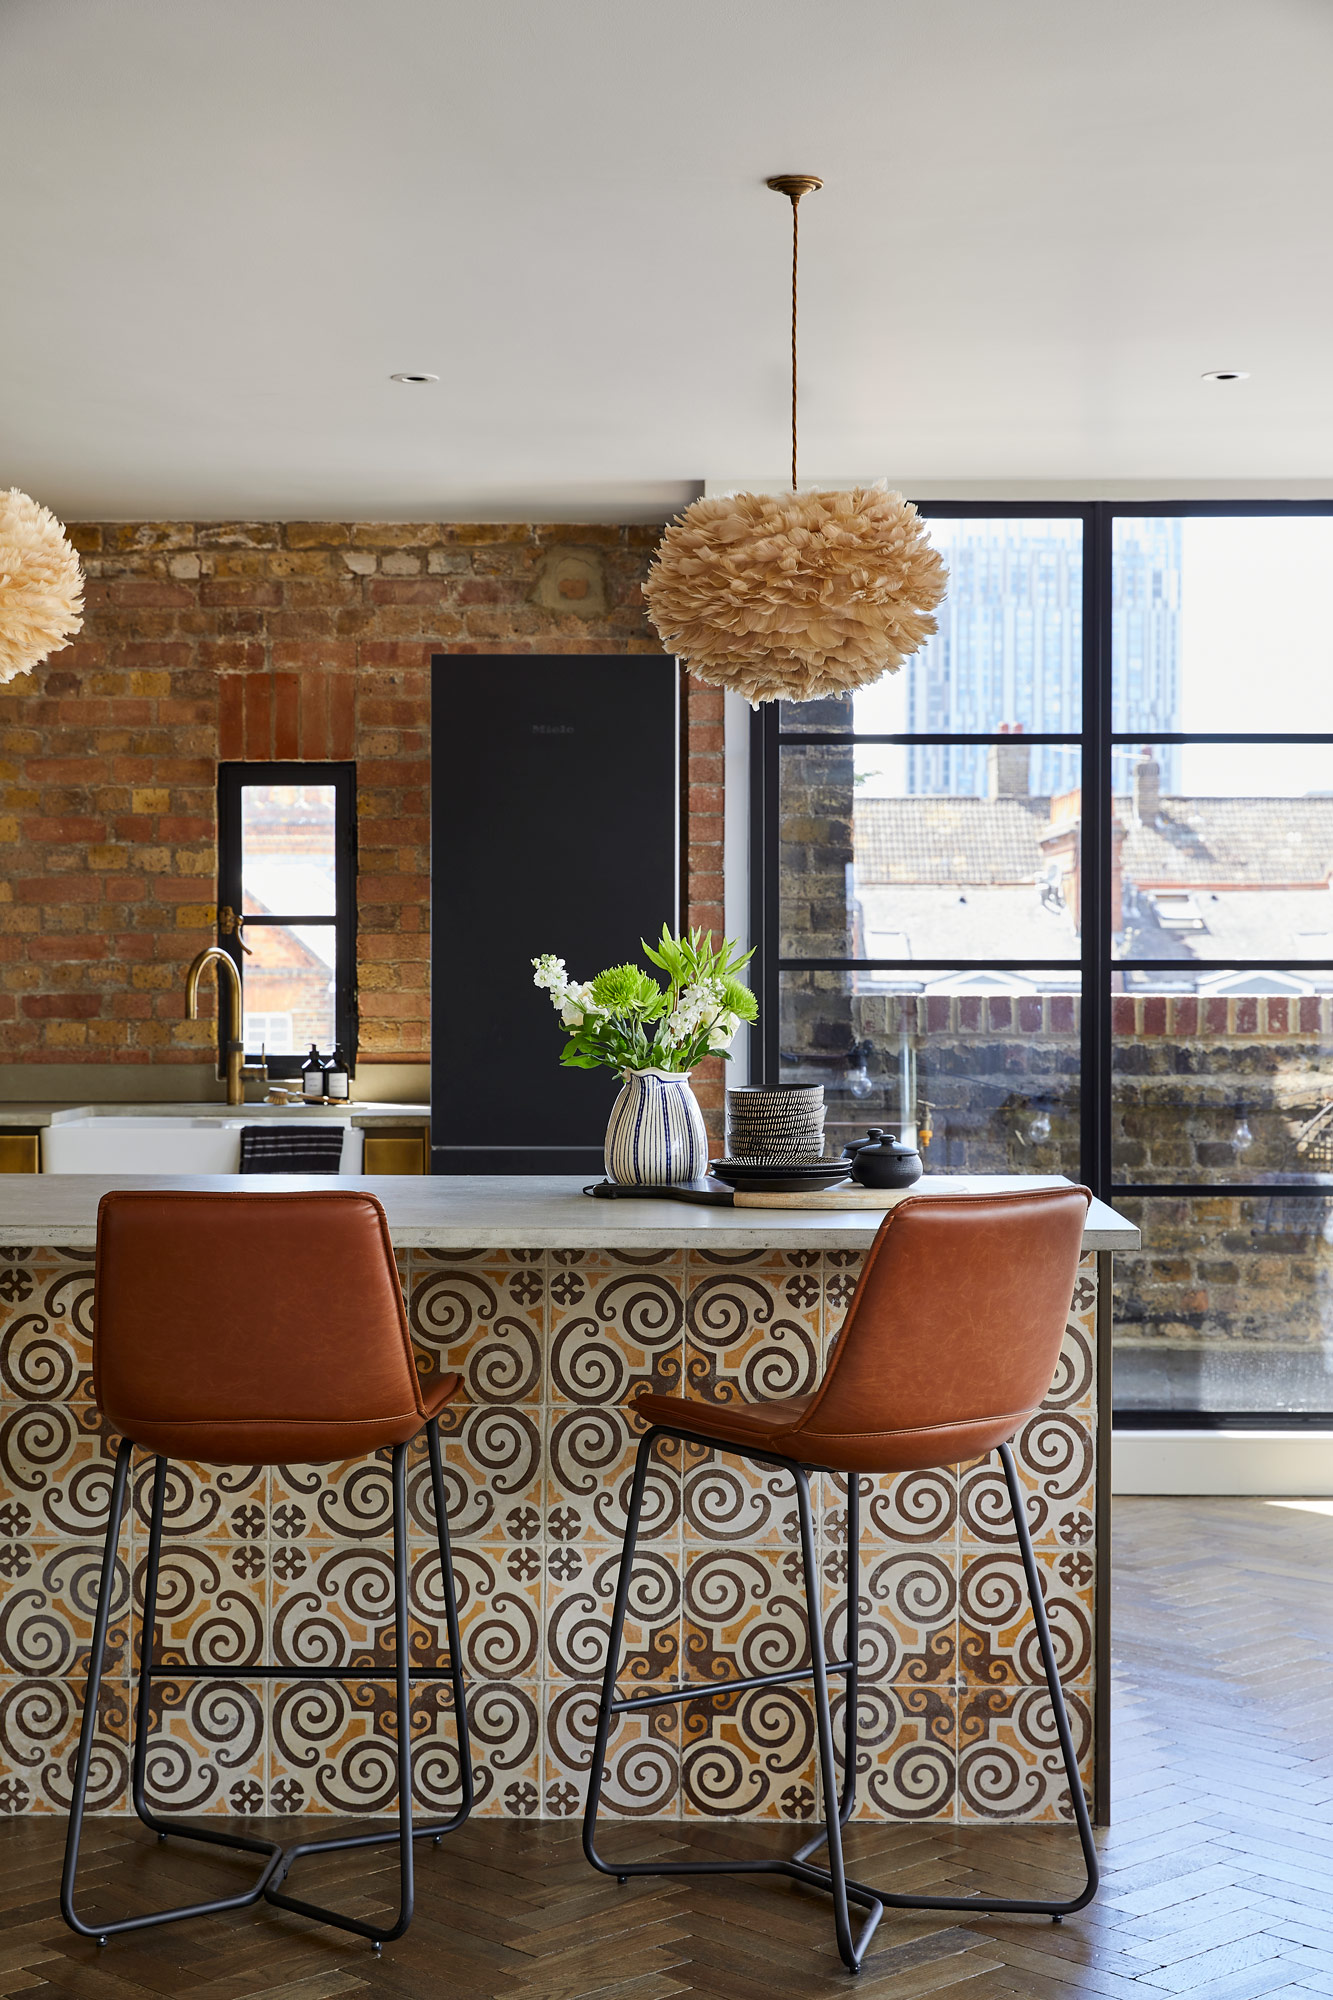 Brown leather barstools sit under metal kitchen with reclaimed tile kickboard